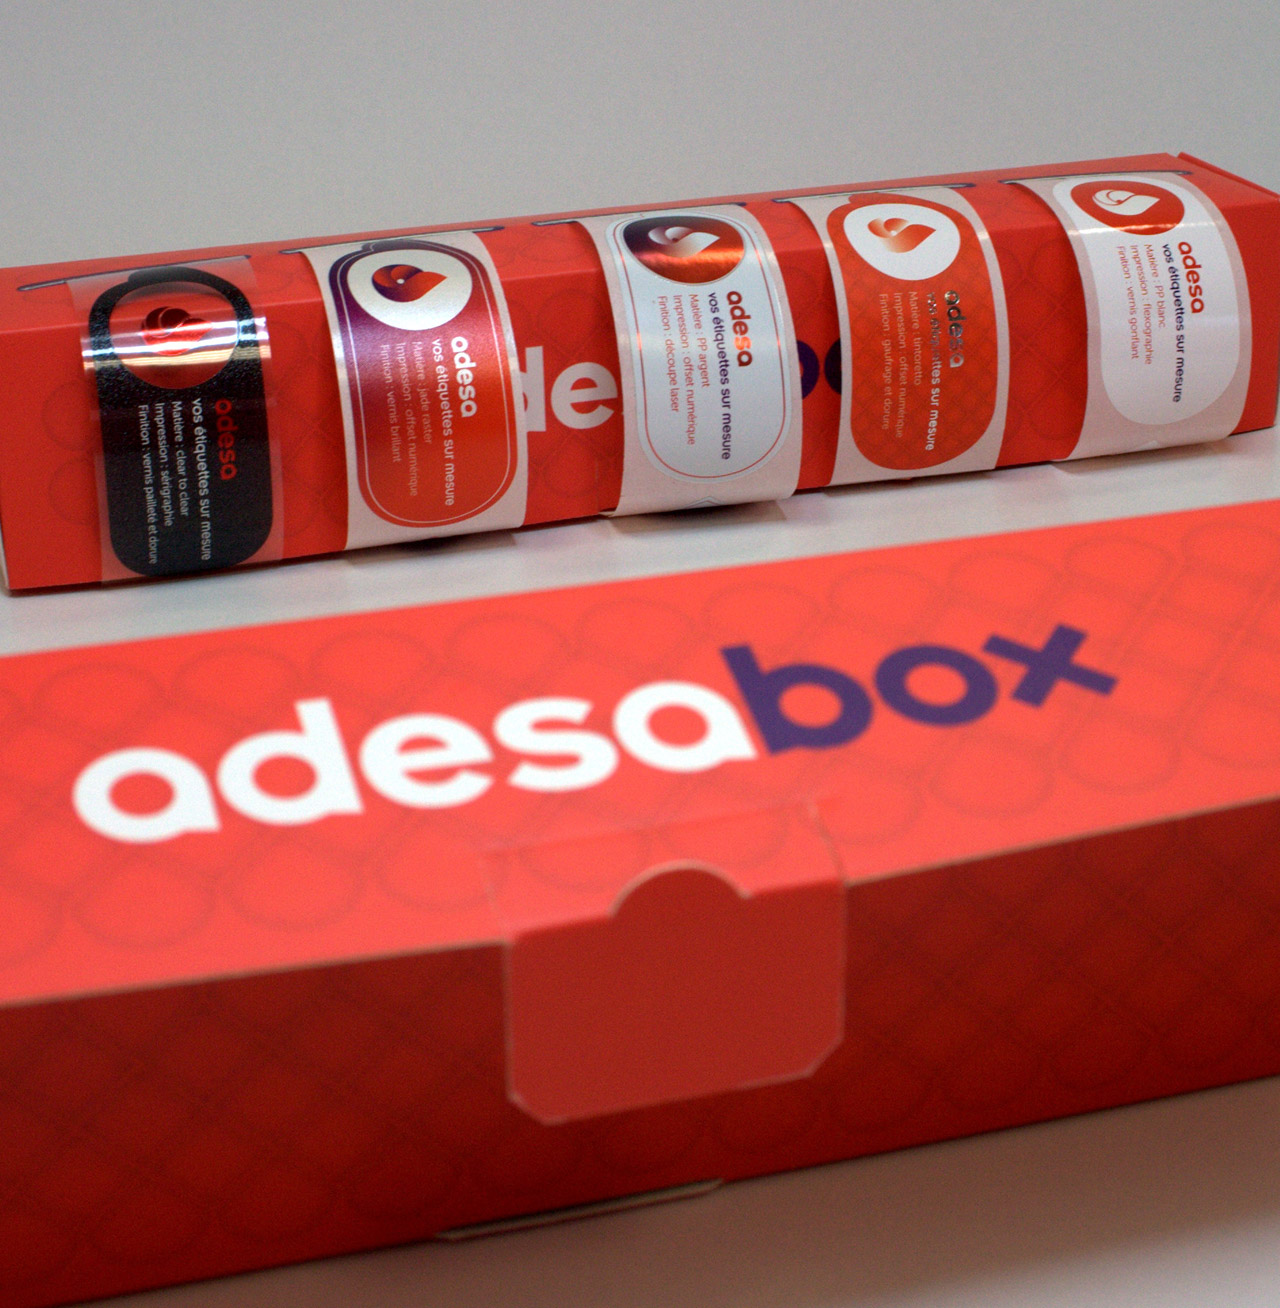 adesa-creation-packaging-adesabox-situation-1-communication-caconcept-alexis-cretin-graphiste